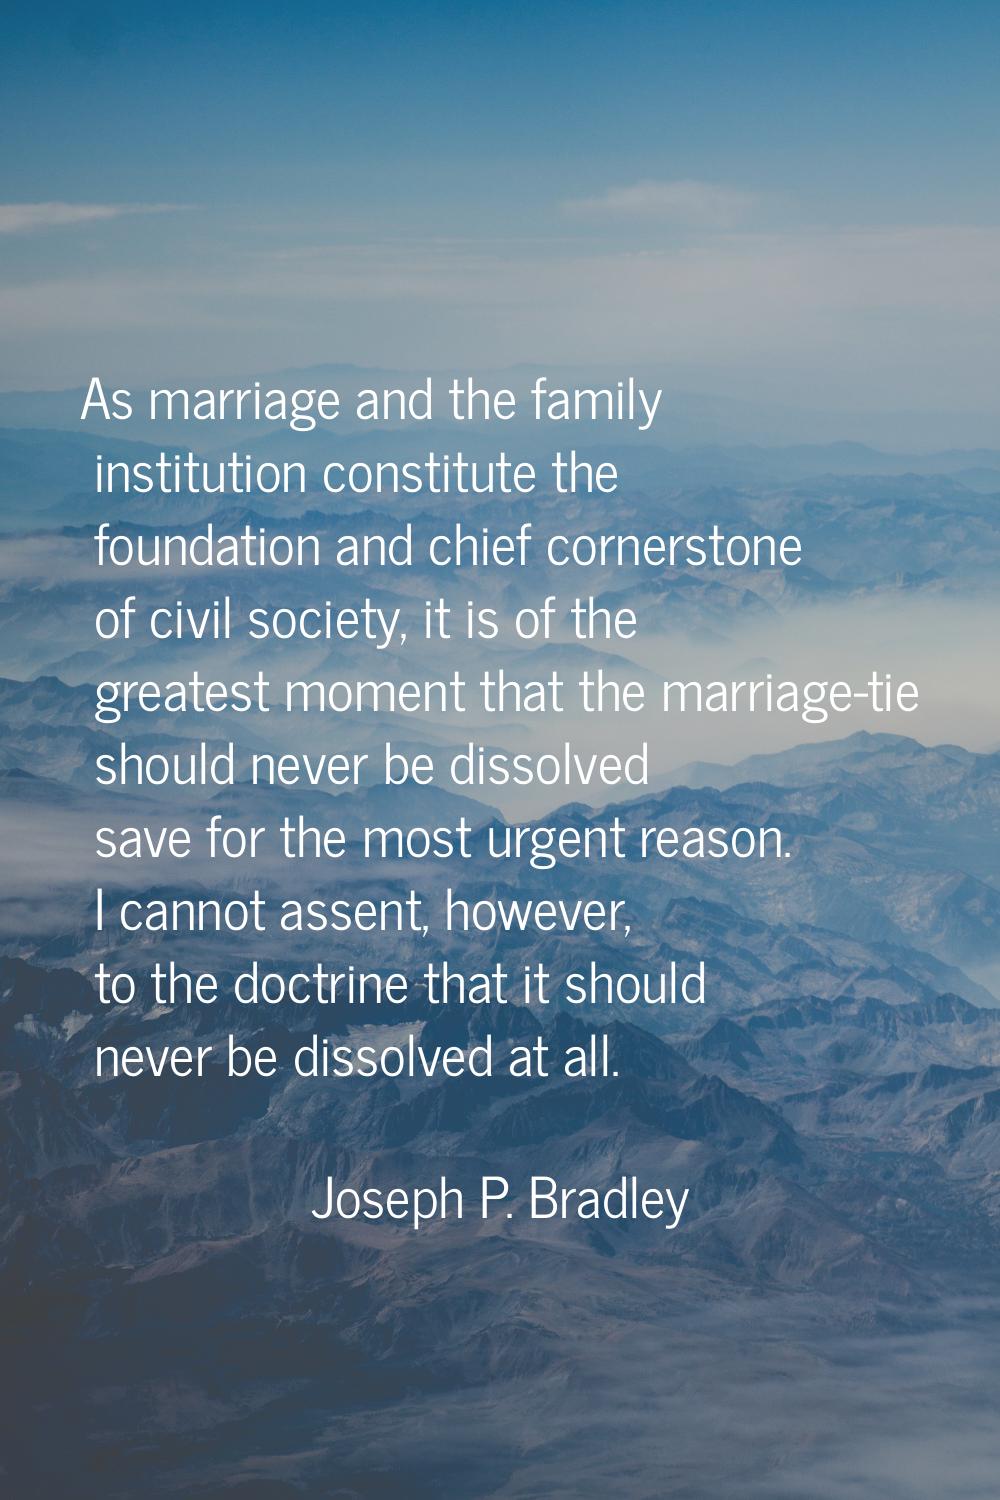 As marriage and the family institution constitute the foundation and chief cornerstone of civil soc